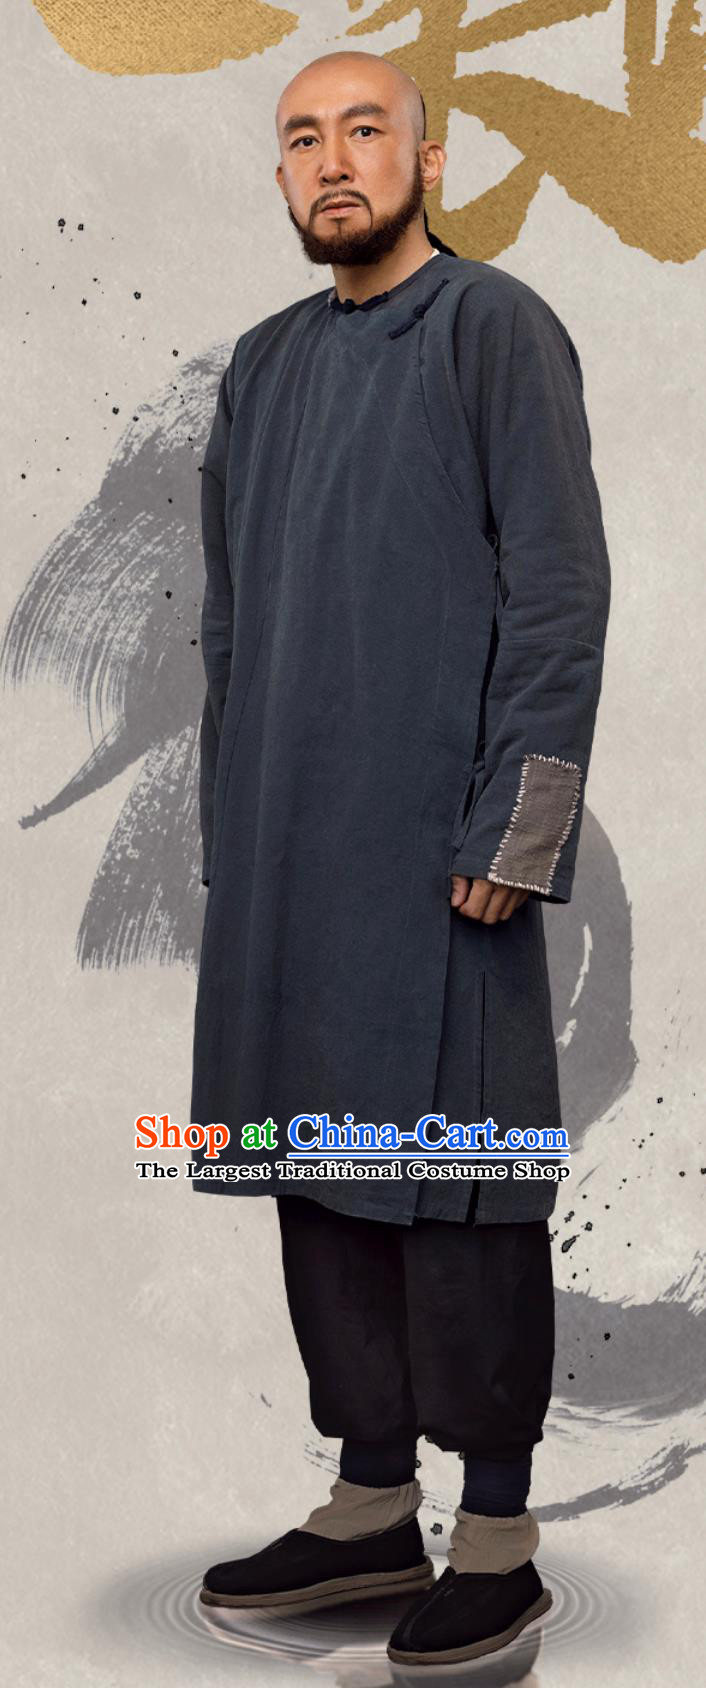 China Ancient Qing Dynasty Civilian Male Clothing Historical Drama The Long River County Magistrate Yu Zhen Jia Outfit